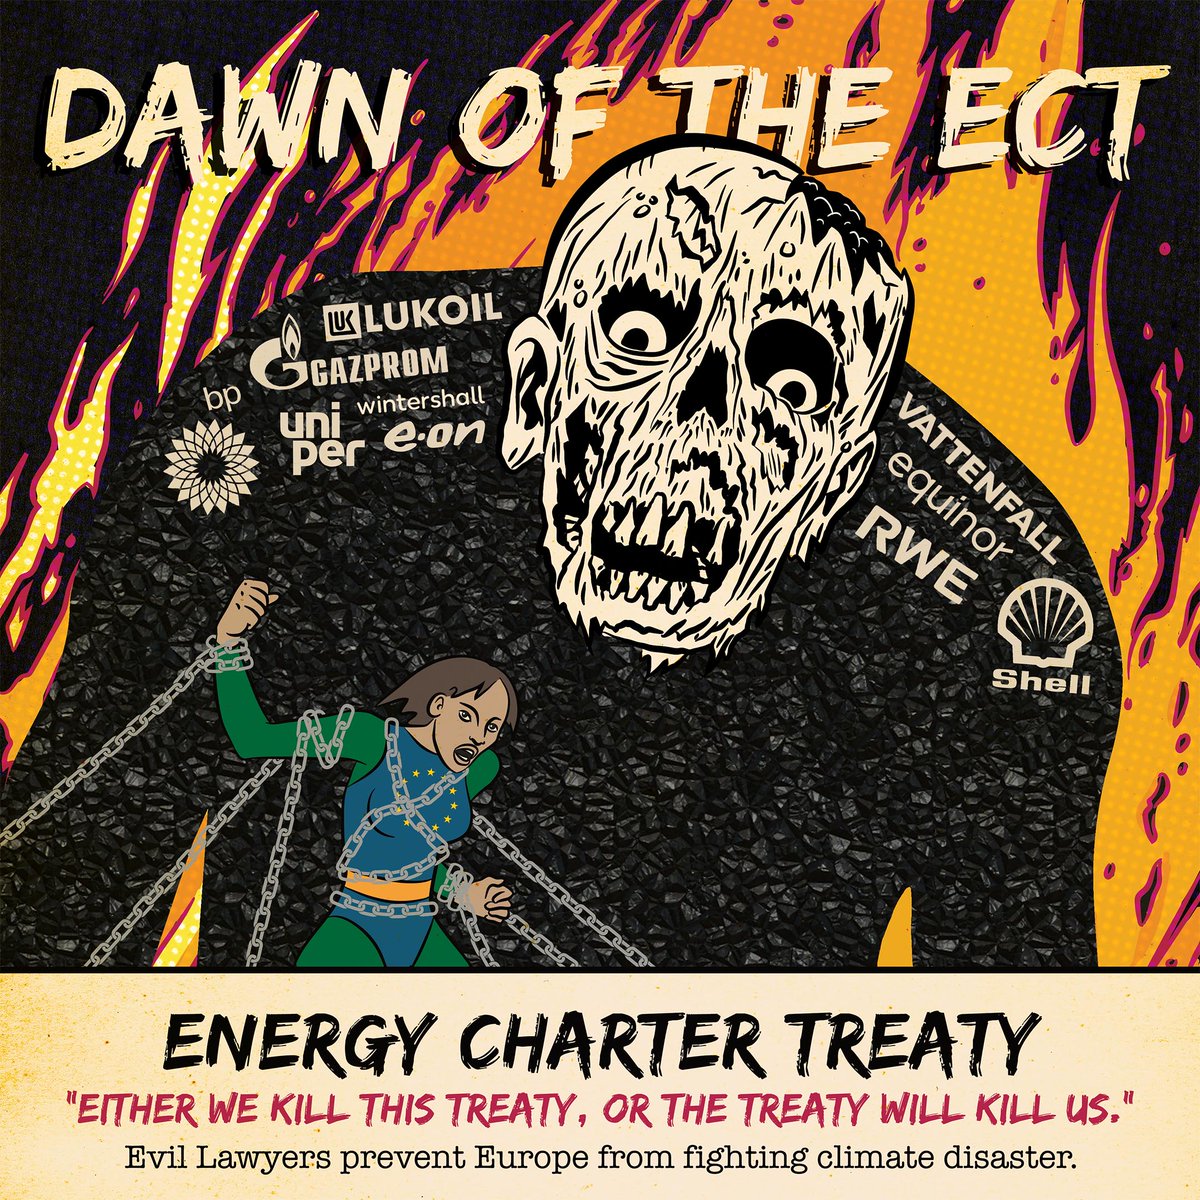 🔥💀Dawn Of The ECT 💀🔥
The Comic Book about the Energy Charter Treaty!

FREE download here: celinekeller.com/dawn-of-the-ect
Time to #EndFossilFuelProtection

“Either we kill this treaty, or the treaty will kill us!” 

@ysaheb #StopISDS #NoECT #ExitECT🧵